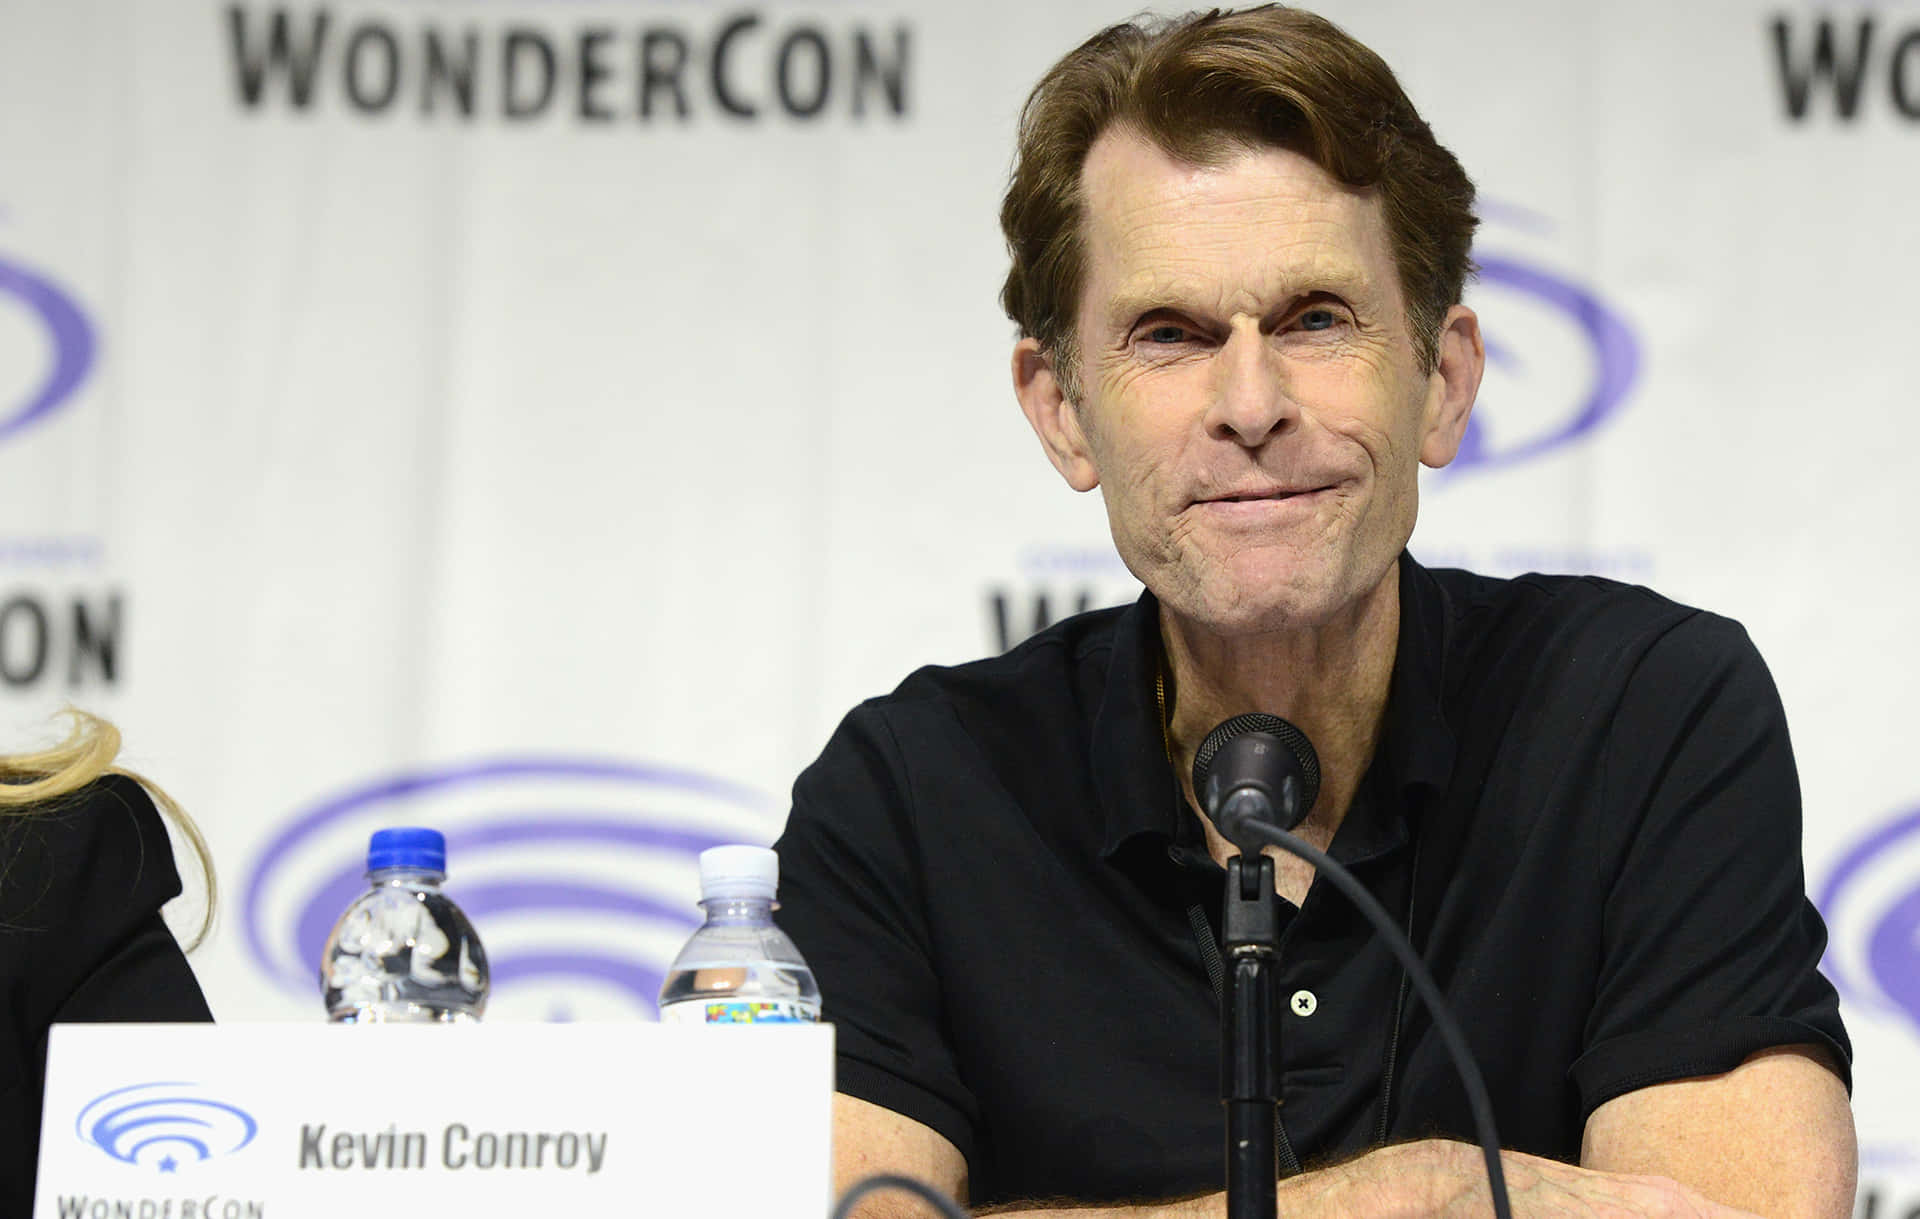 Kevin Conroy with a microphone in a sound booth Wallpaper